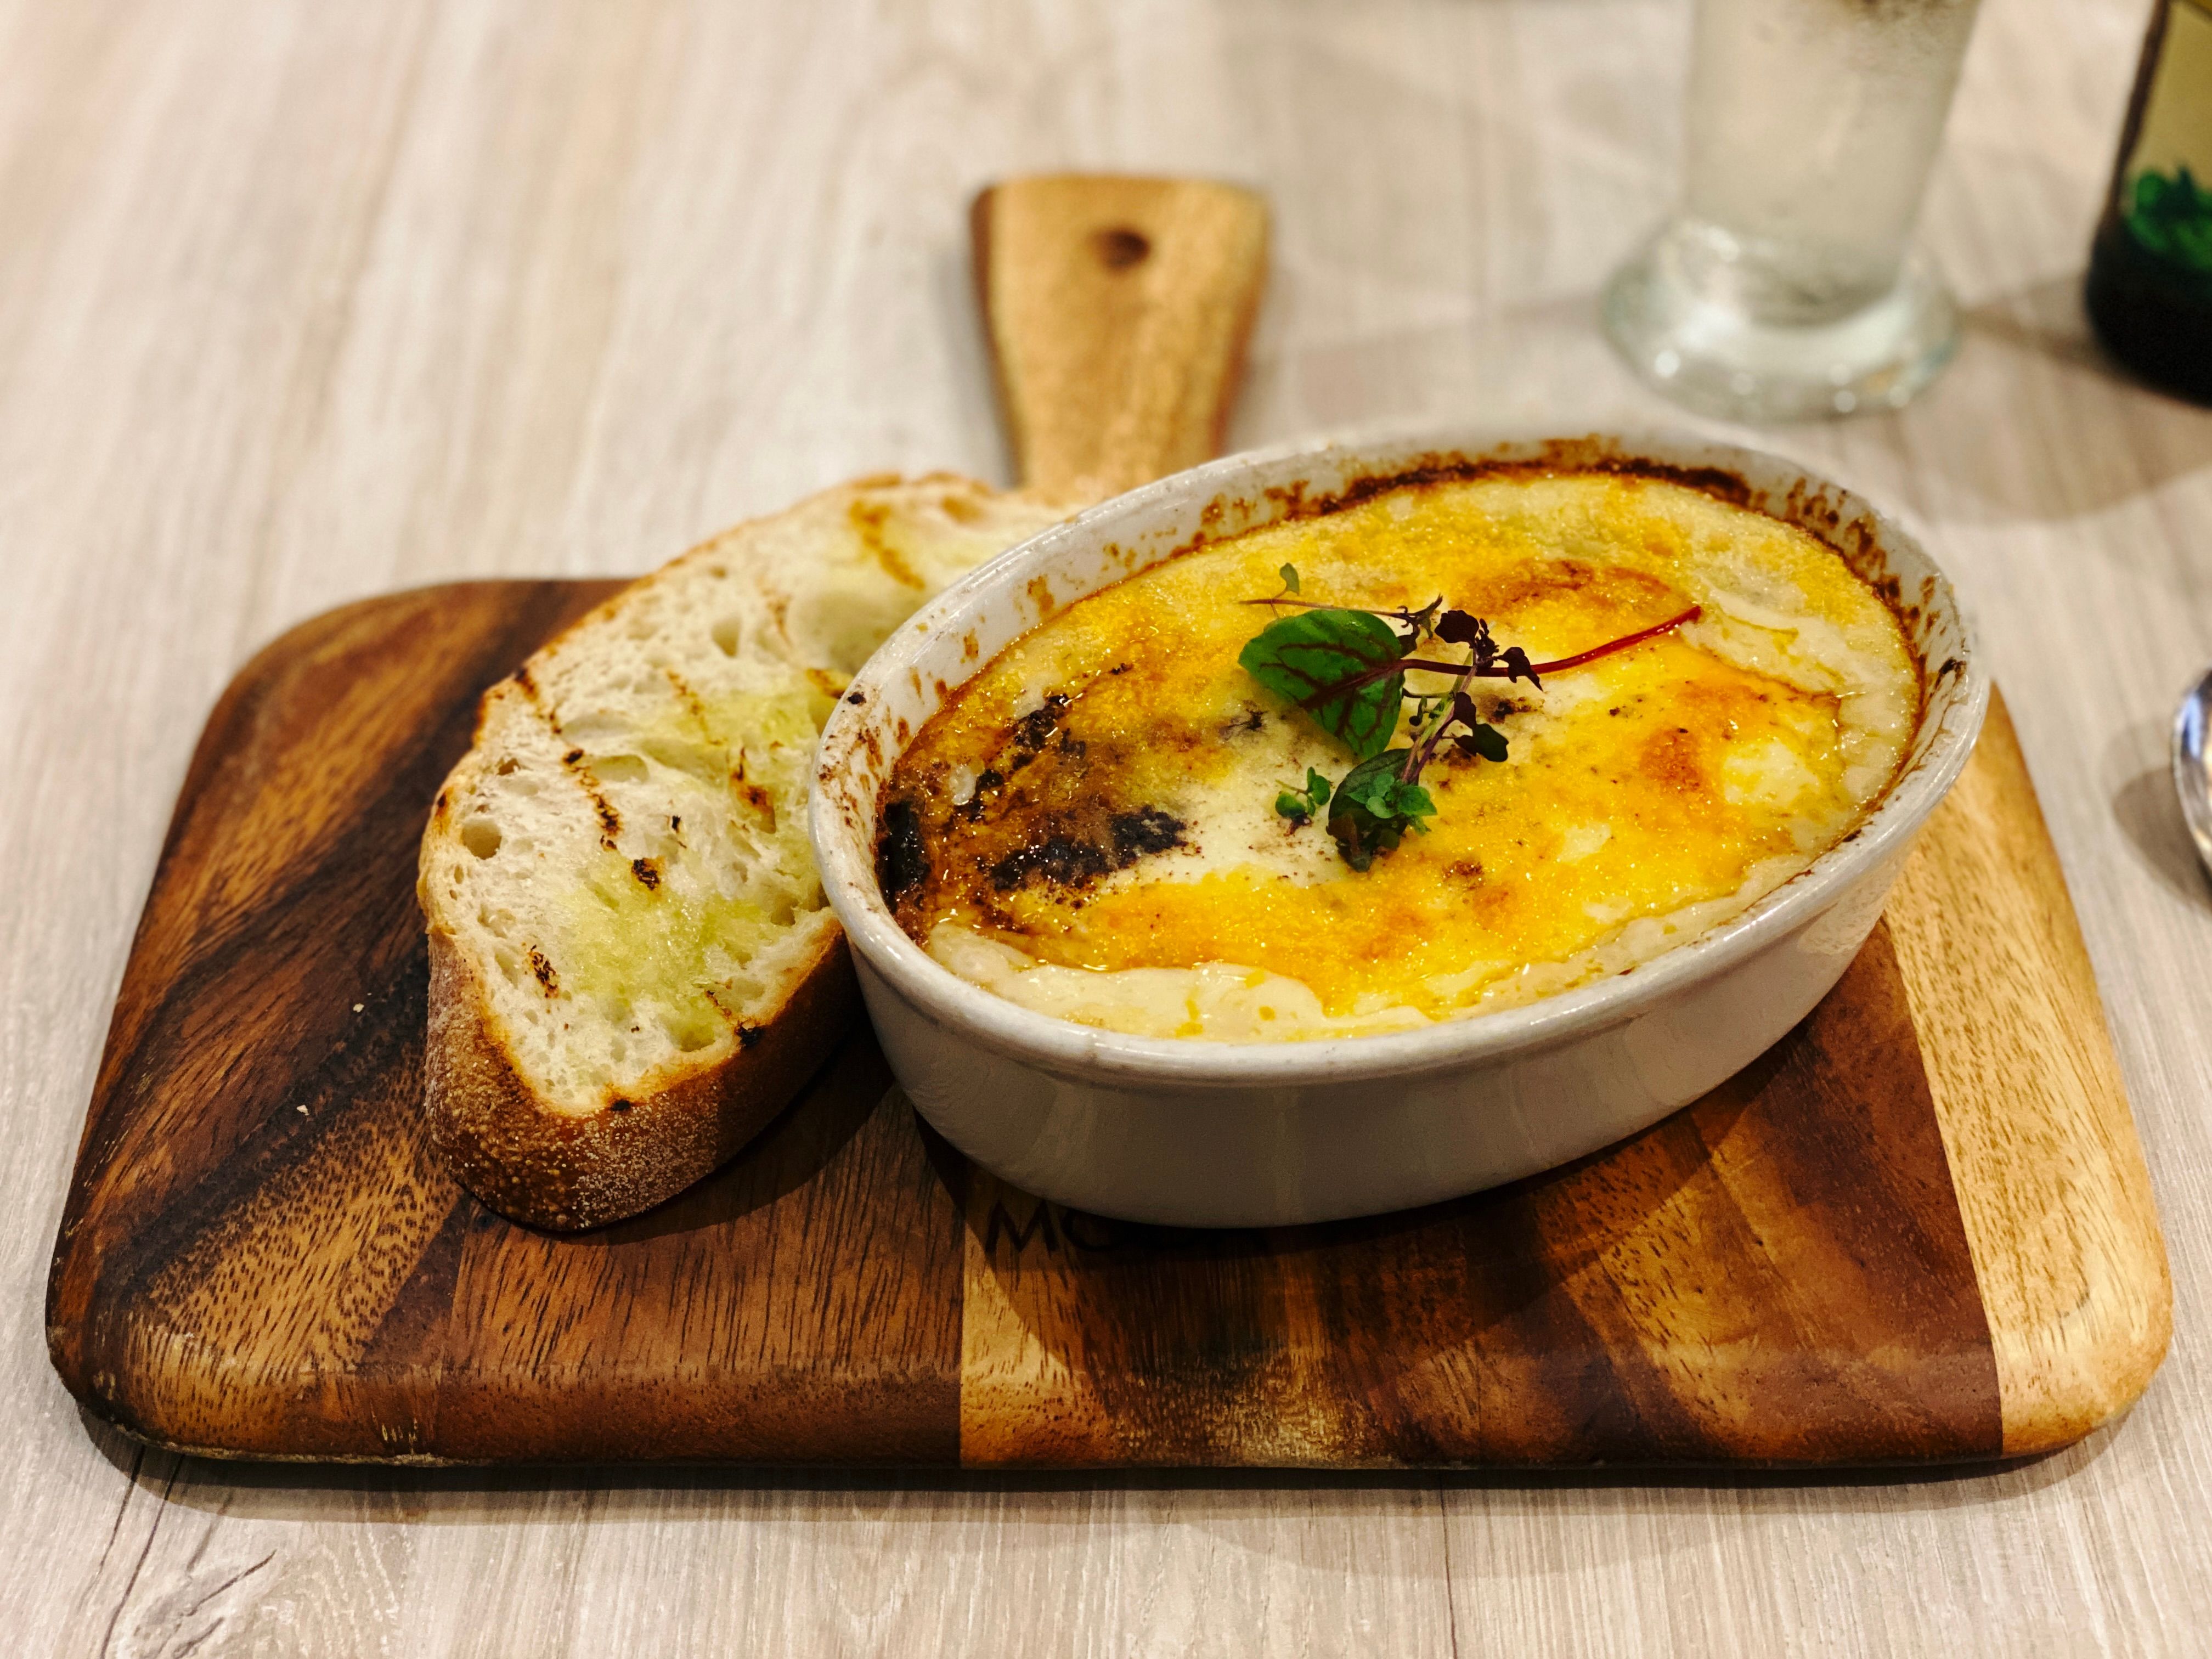 A photo of an oval-shaped ceramic dish with moussaka in it, alongside a slice of bread.